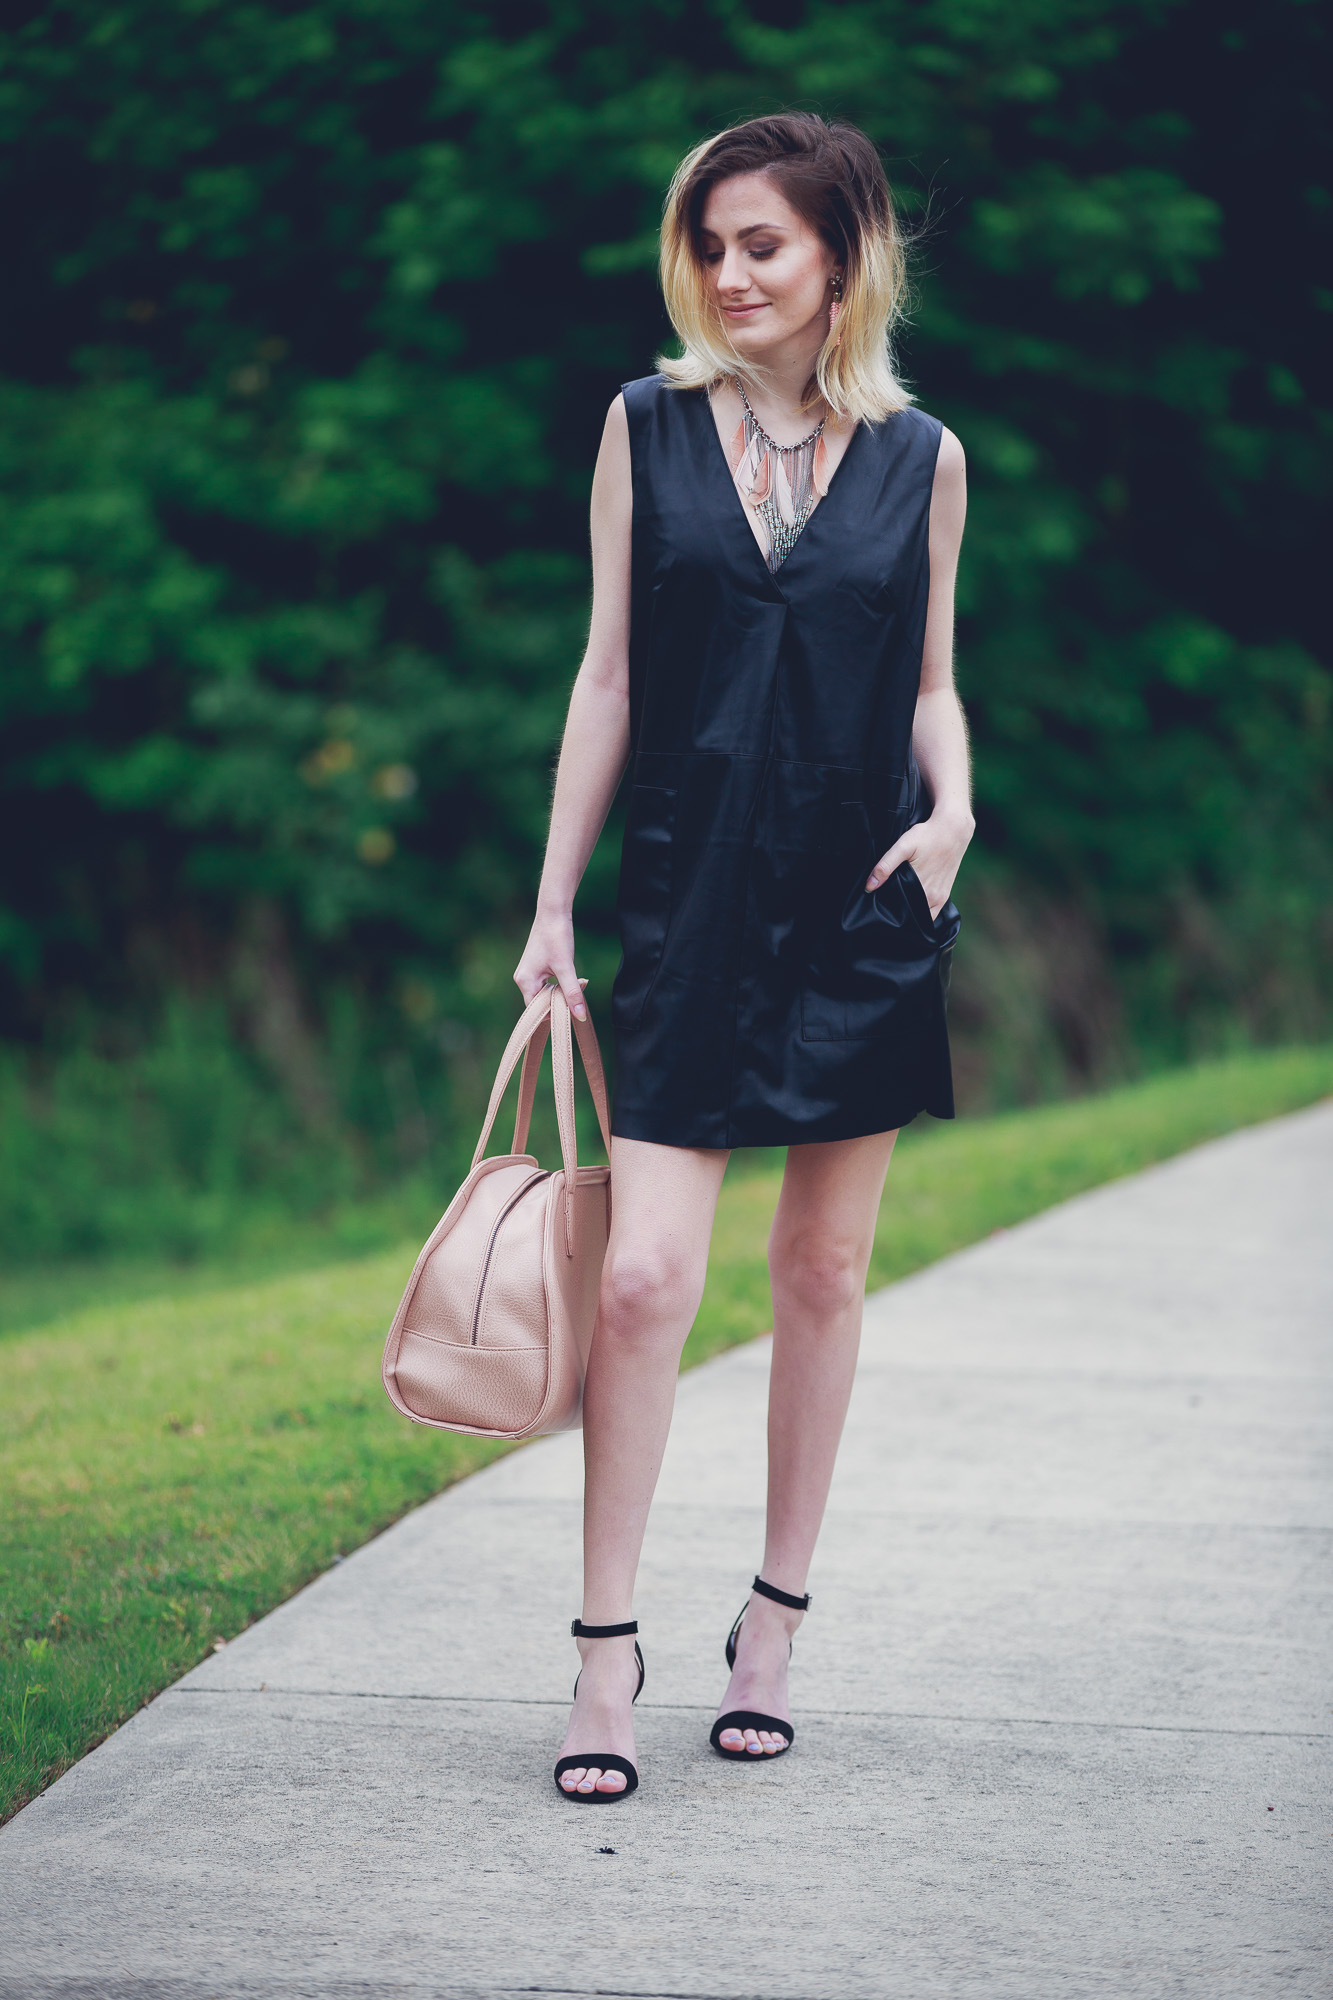 Lifestyle and Fashion Blogger, Jessica Linn, wearing a faux leather Forever21 dress, ASOS heels, a statement necklace from Target, earrings from the Baublebar, and carrying a Matt and Nat purse.